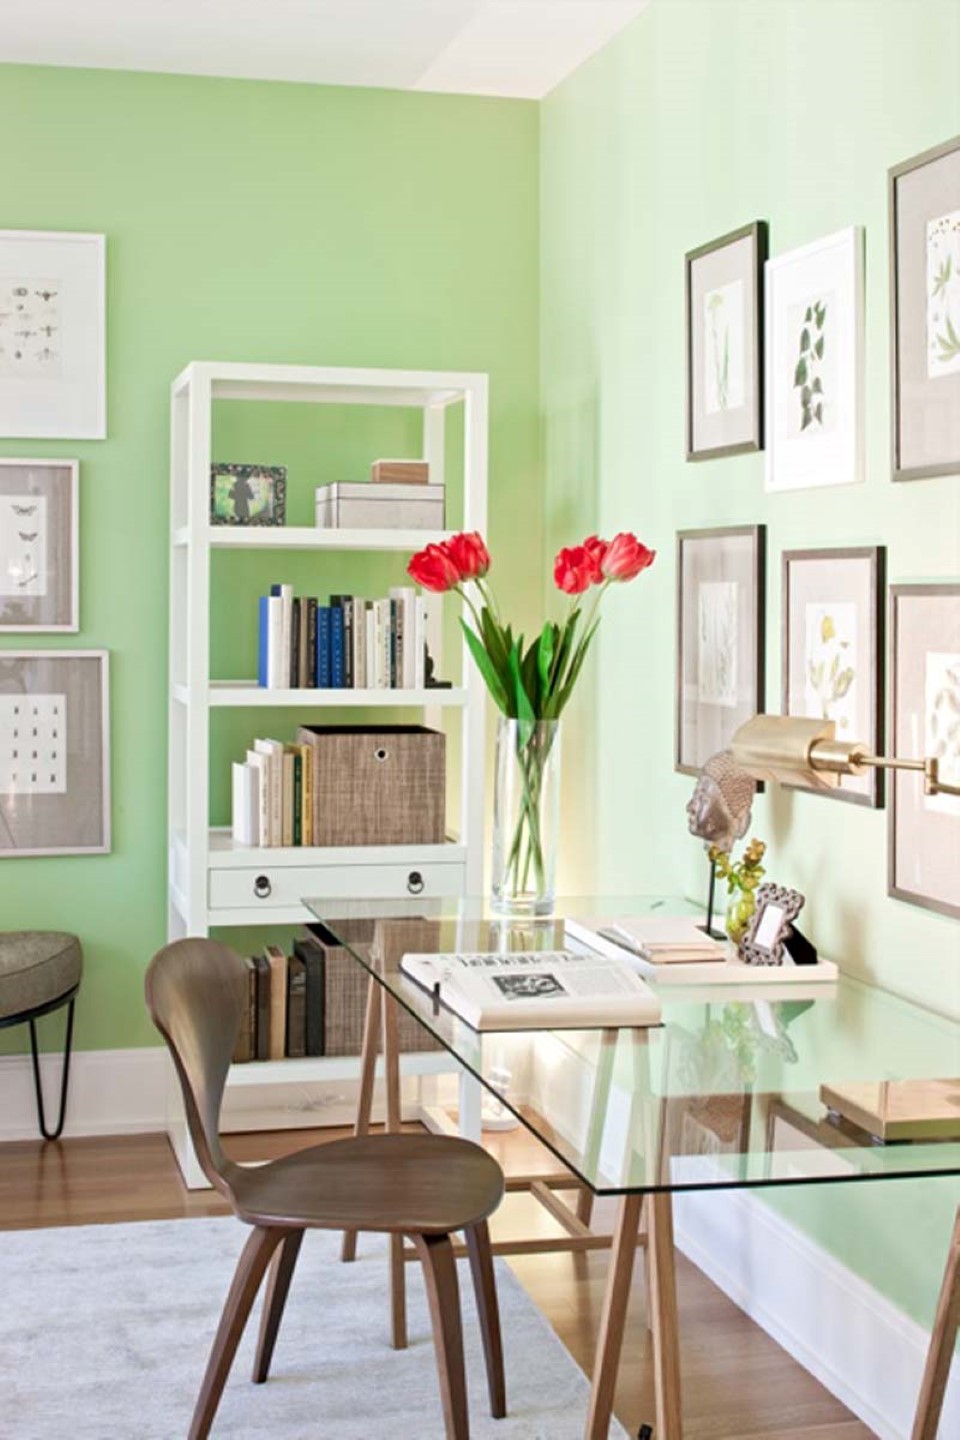 Green Wall Ideas Soothing Green Wall Paint Color Ideas Mixed With Framed Art Gallery And Contemporary Home Office Furniture Office Some Tips For Creating Relax And Comfortable Office Or Work Space At Your Home